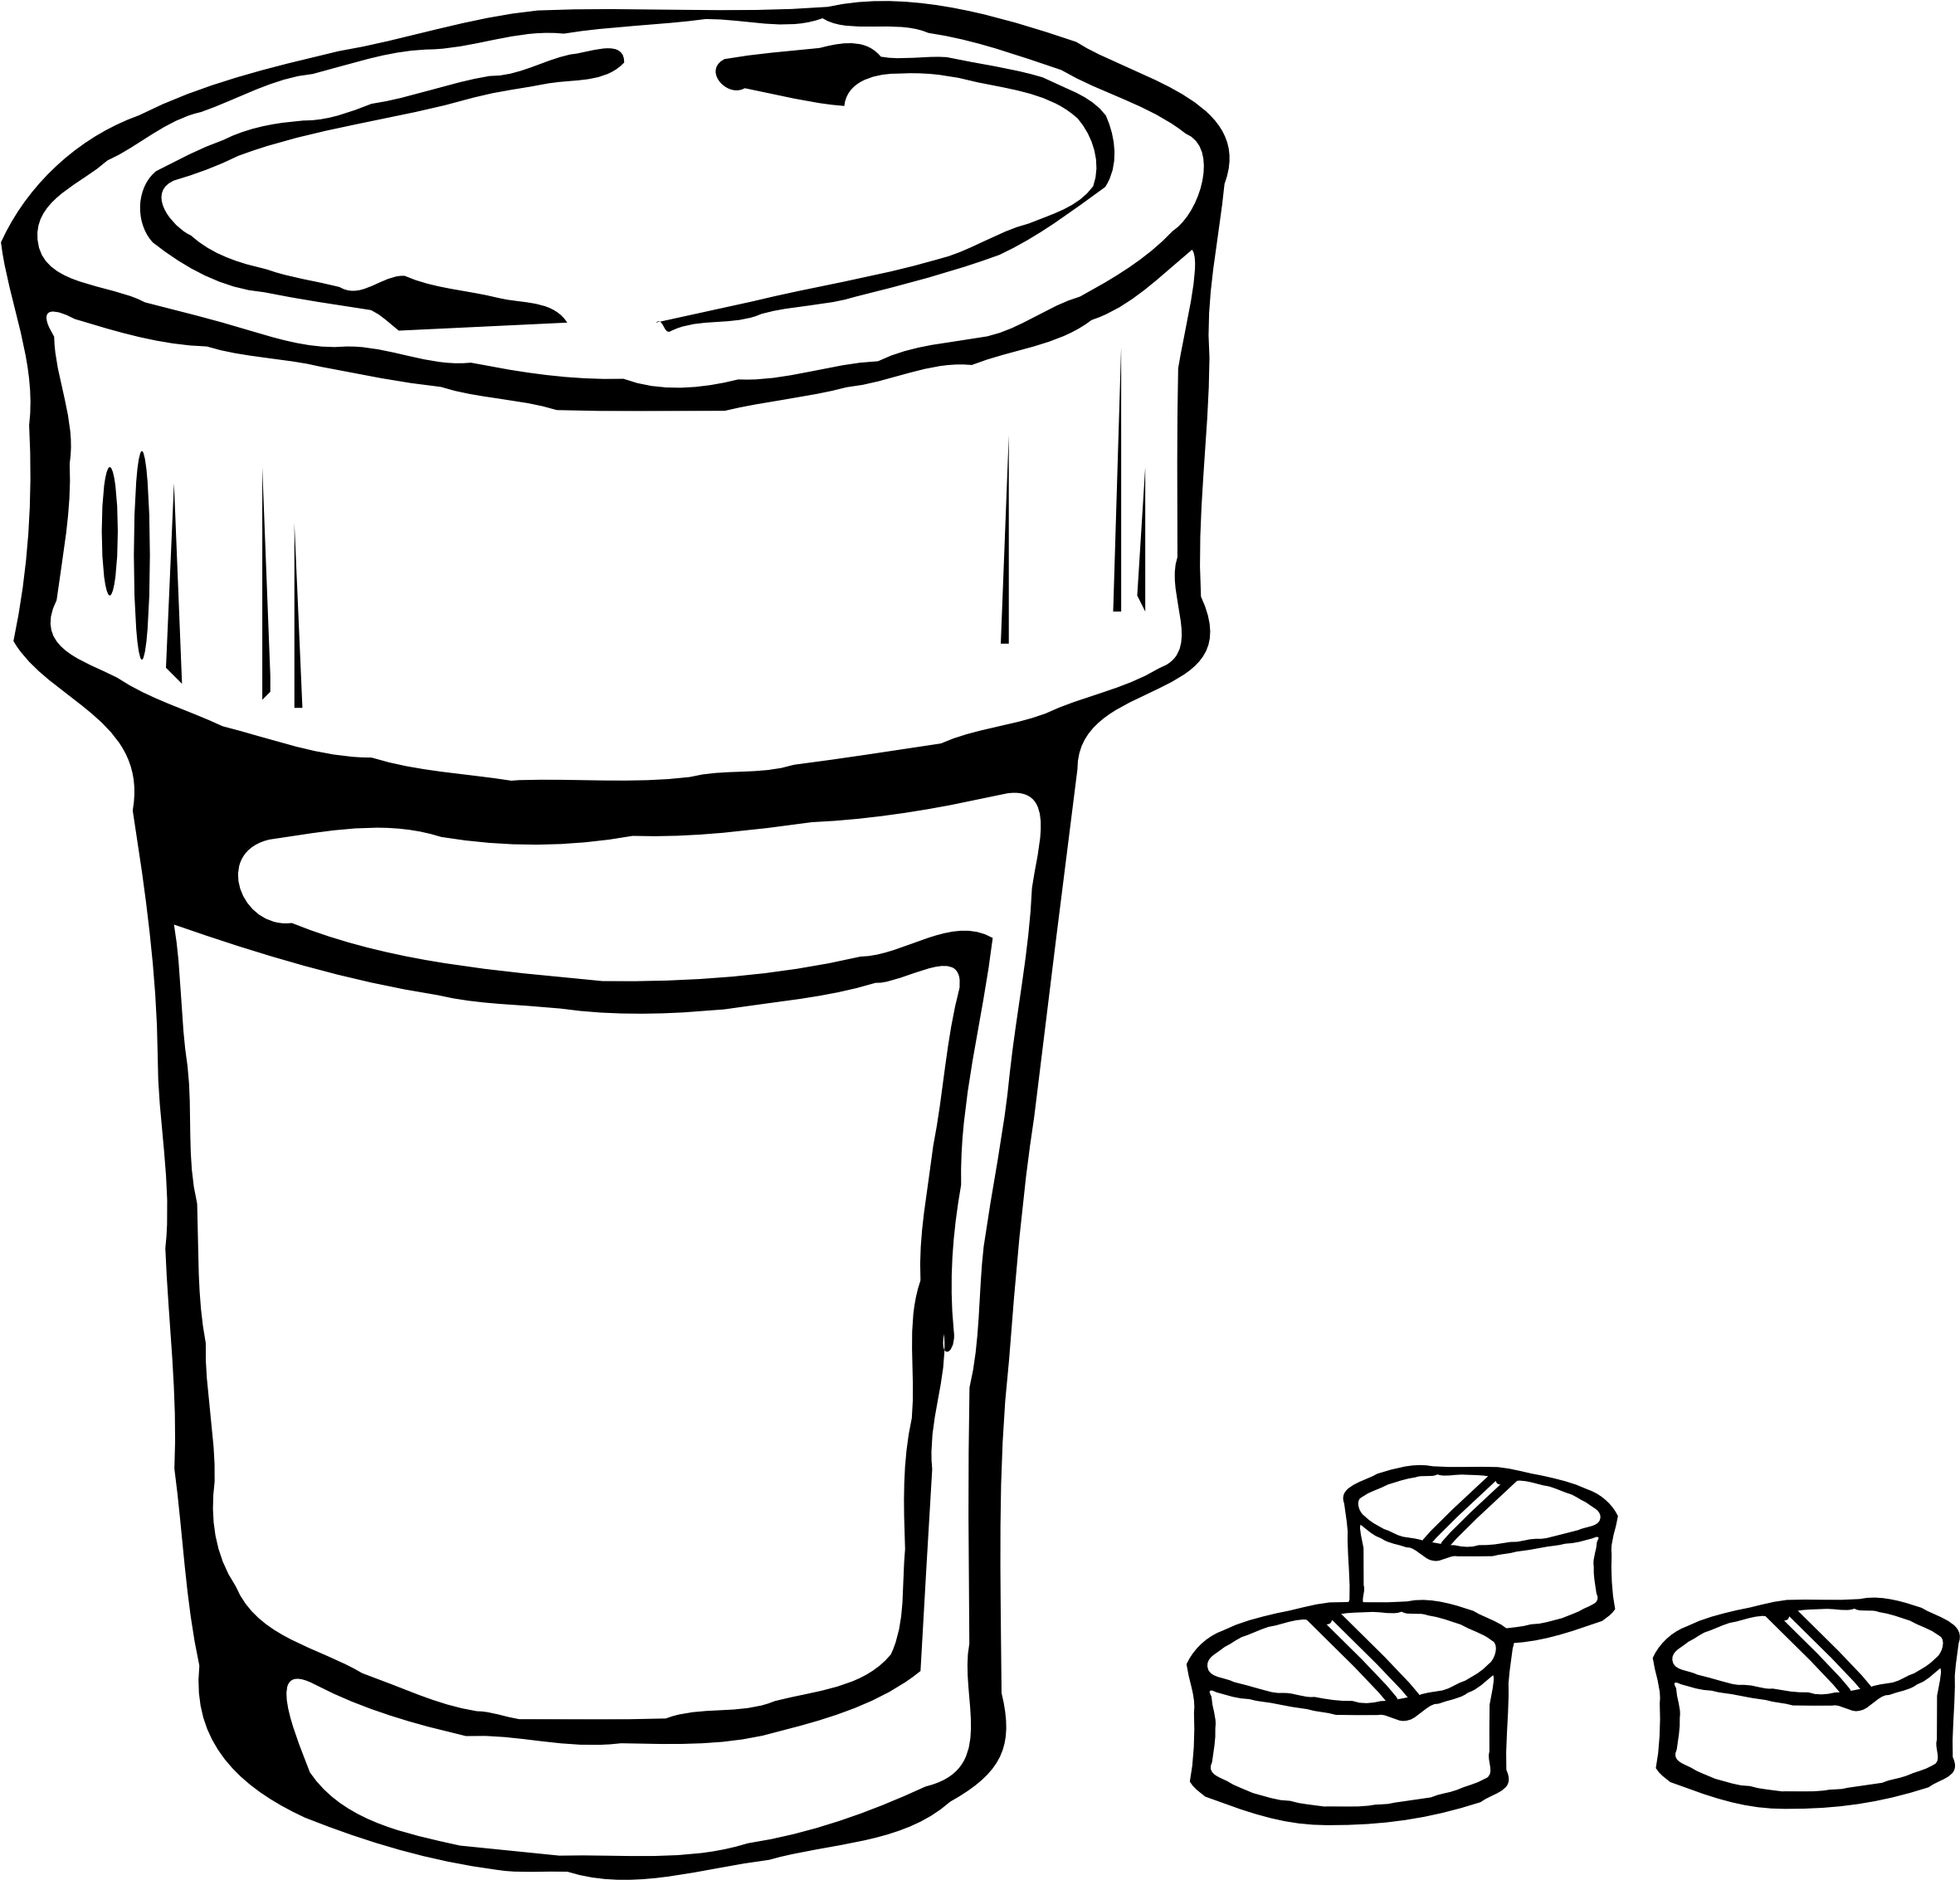 More From My Site - Pill Bottle Line Art (2555x2451)